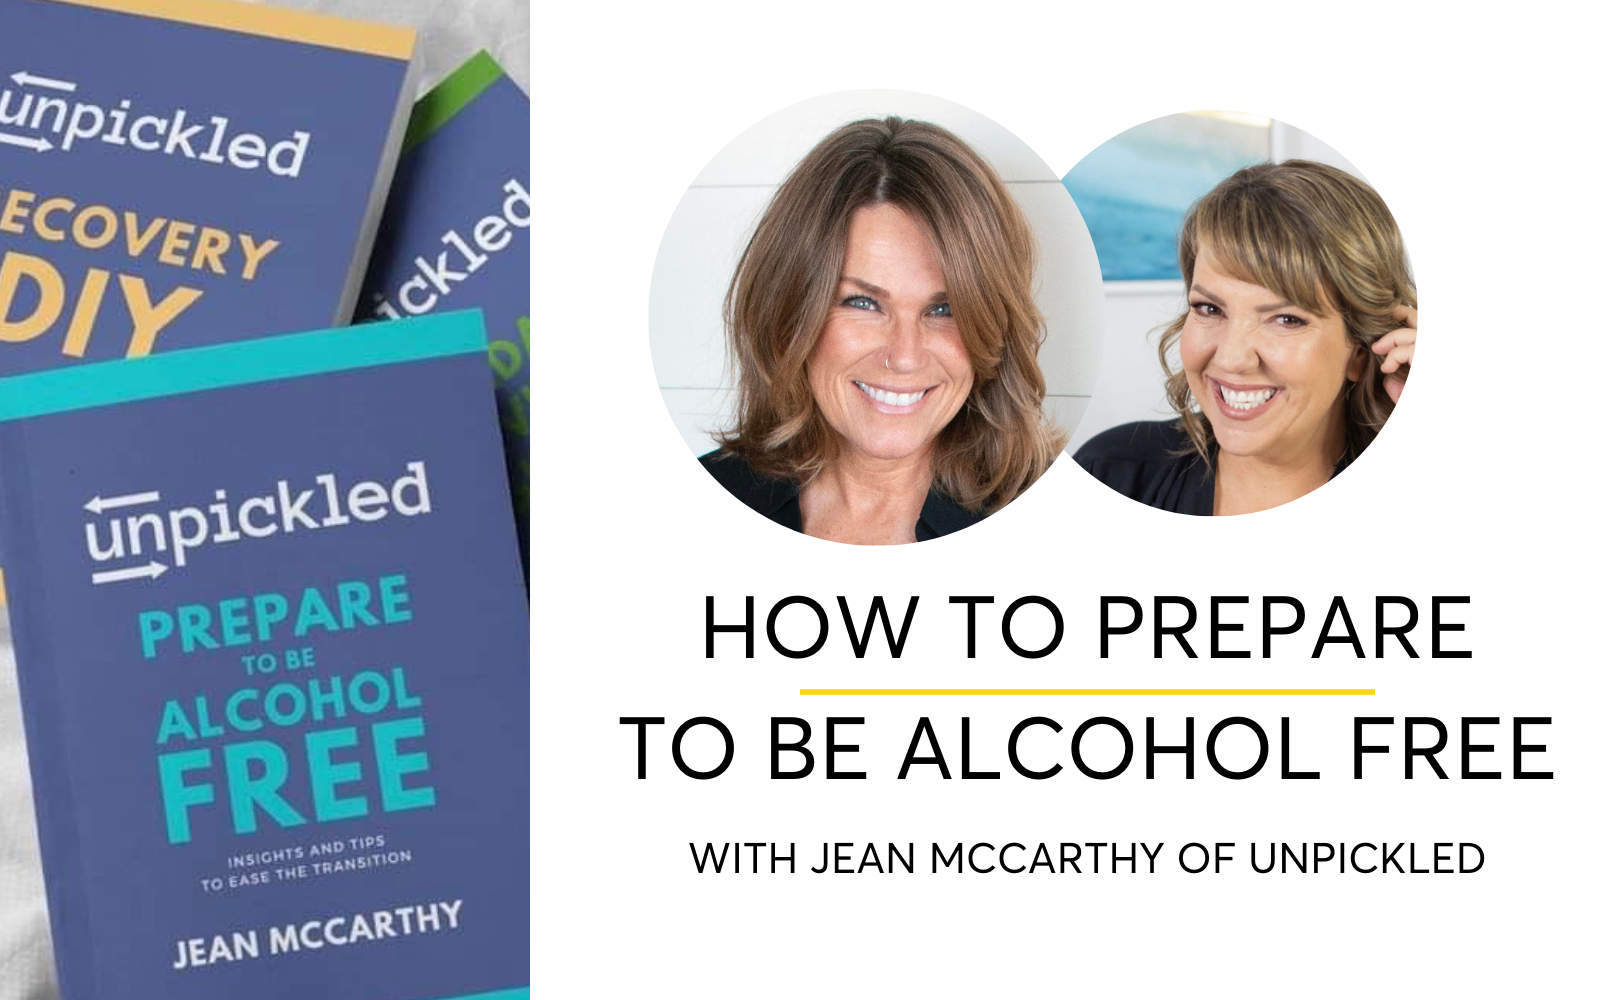 How To Prepare To Be Alcohol-Free